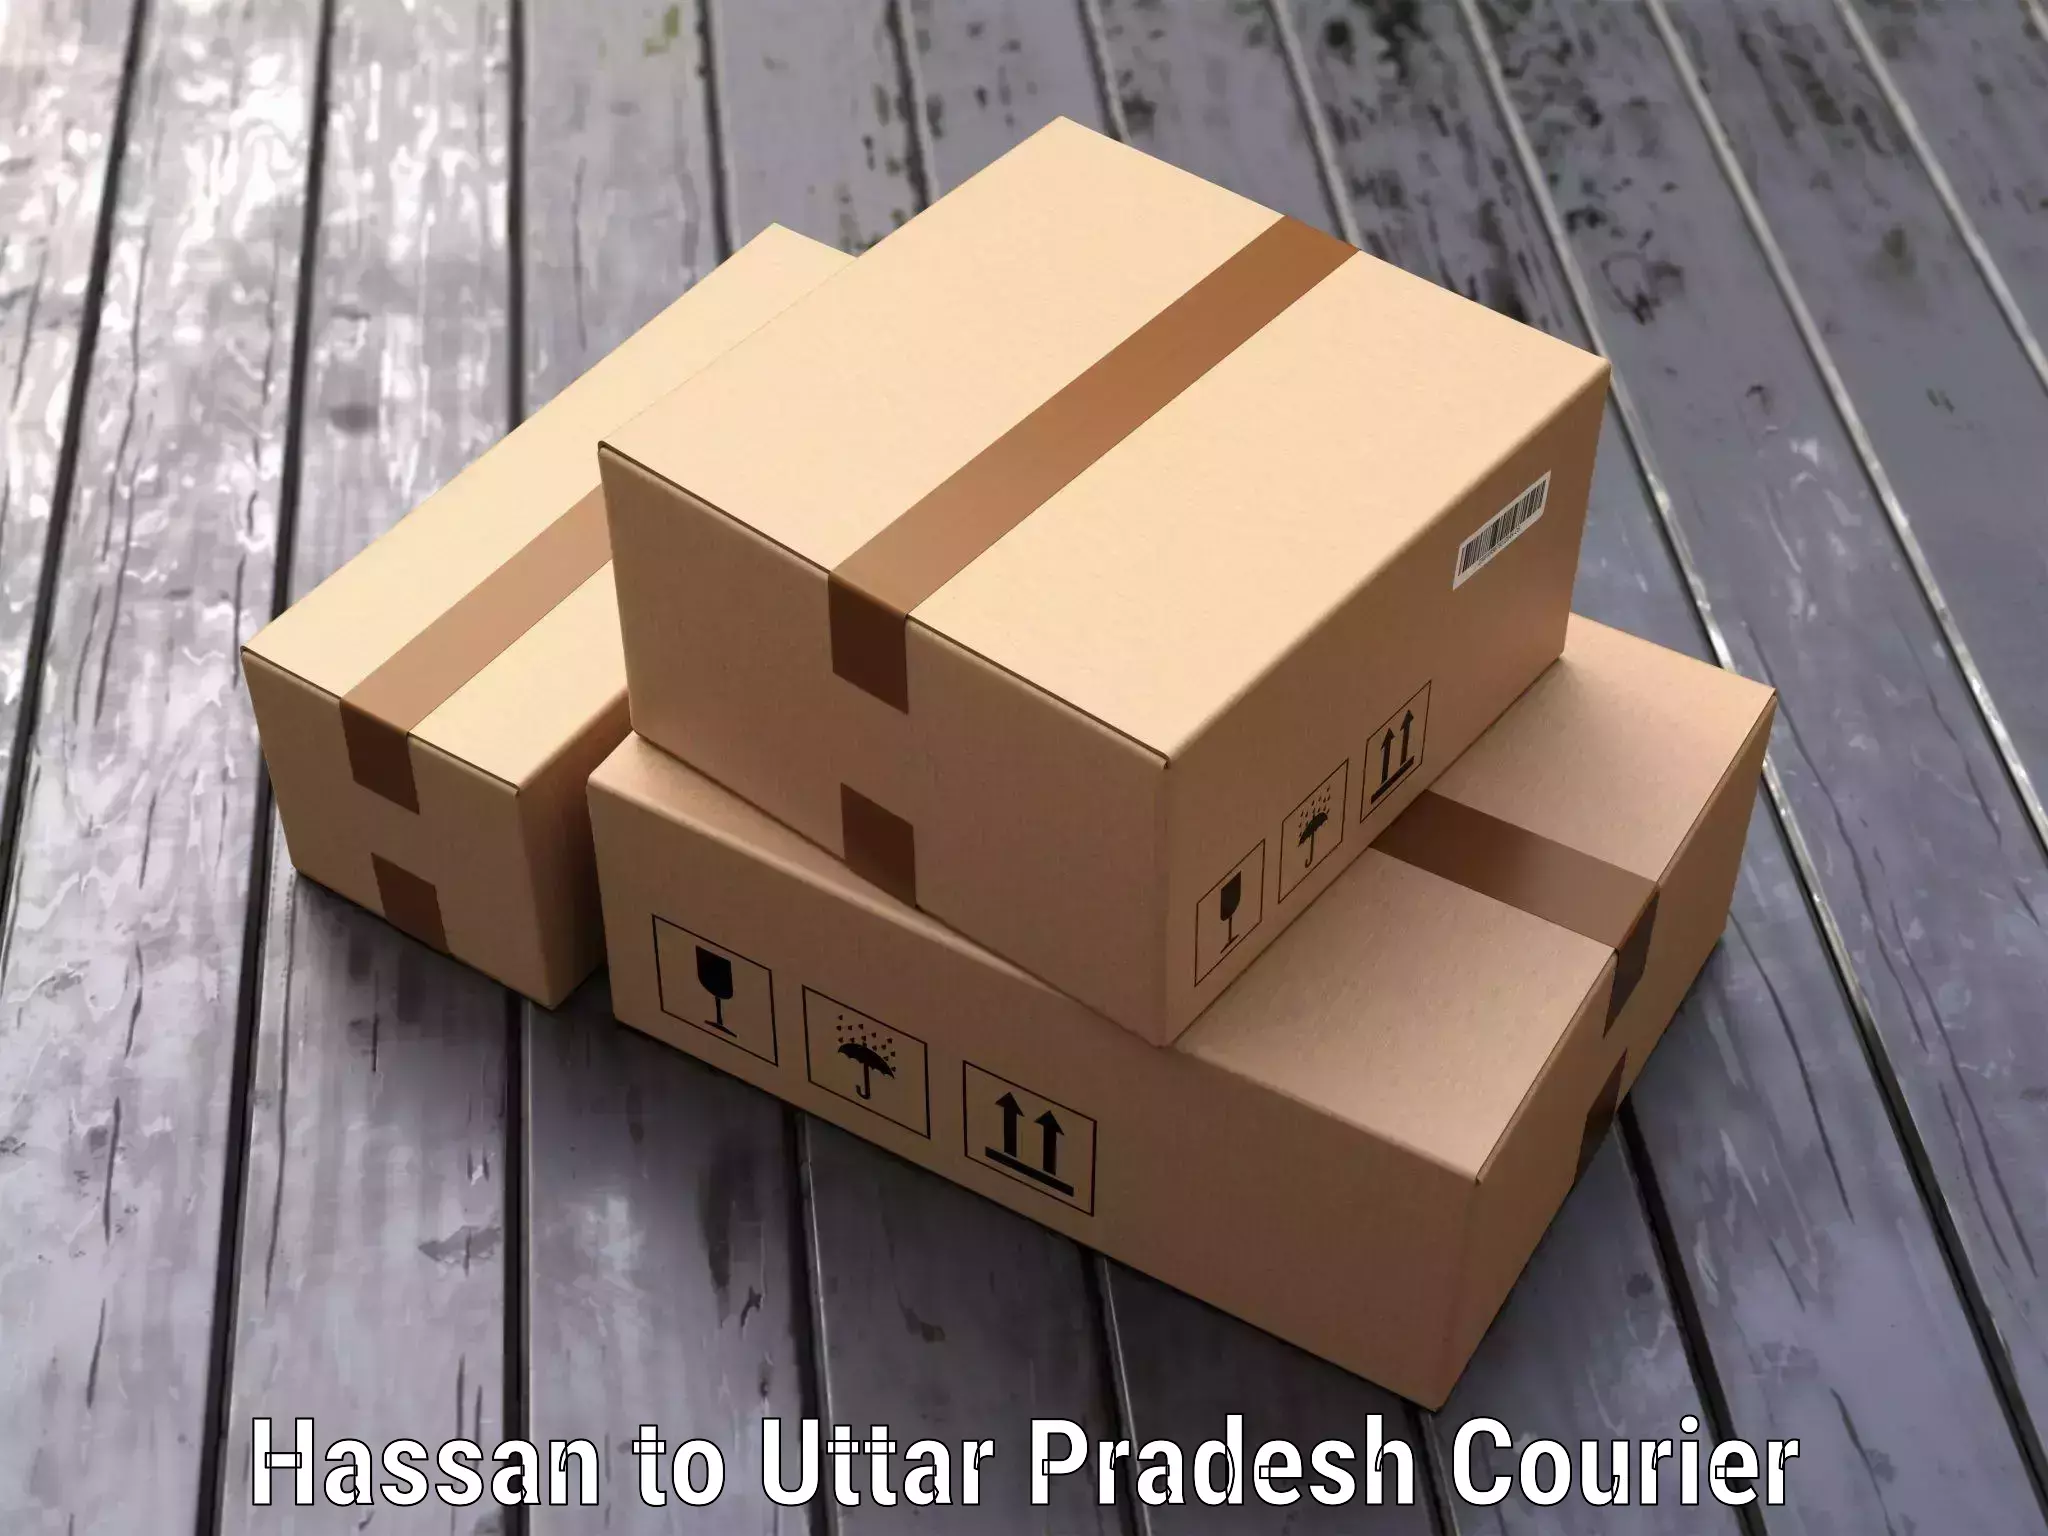 Luggage delivery network Hassan to Uttar Pradesh